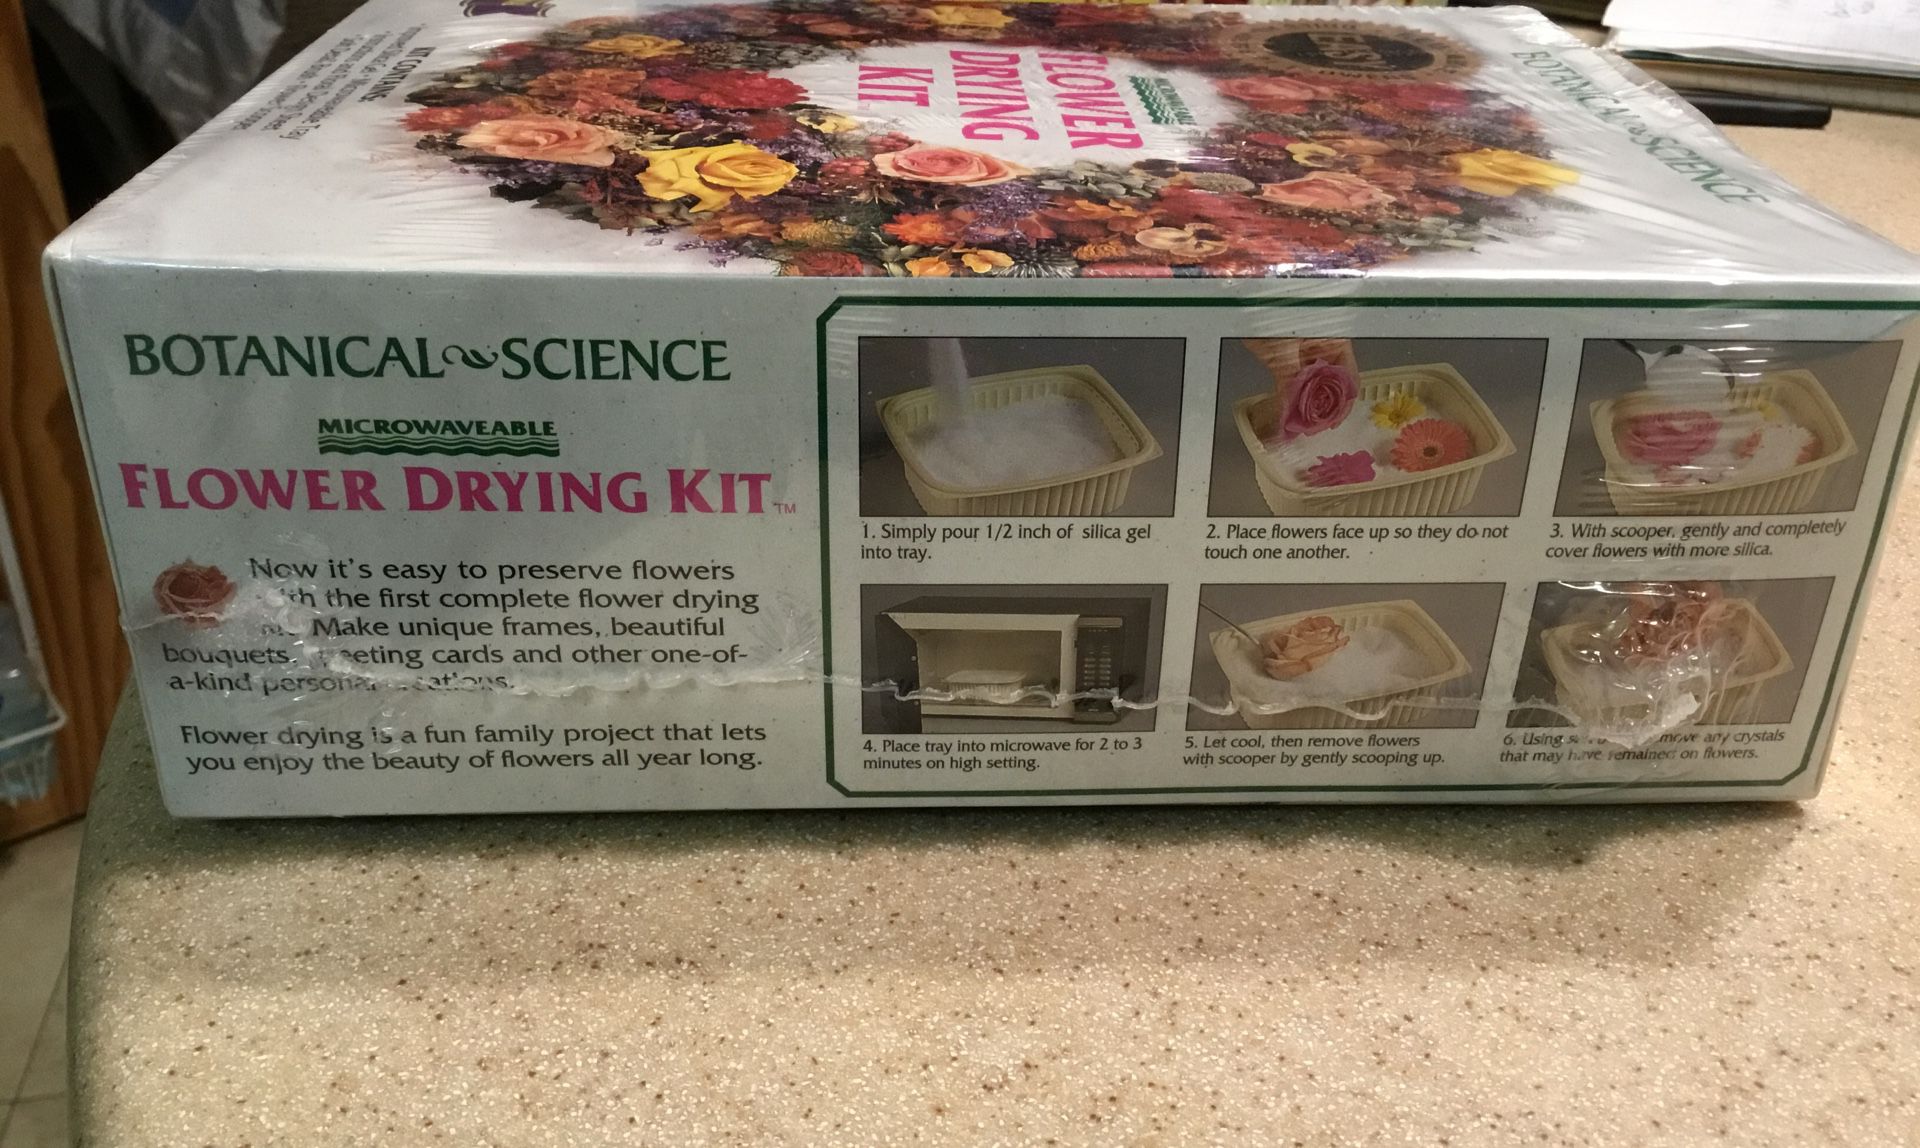 Flower Drying Kit By Botanical Science - Silica Gel /Microwavable